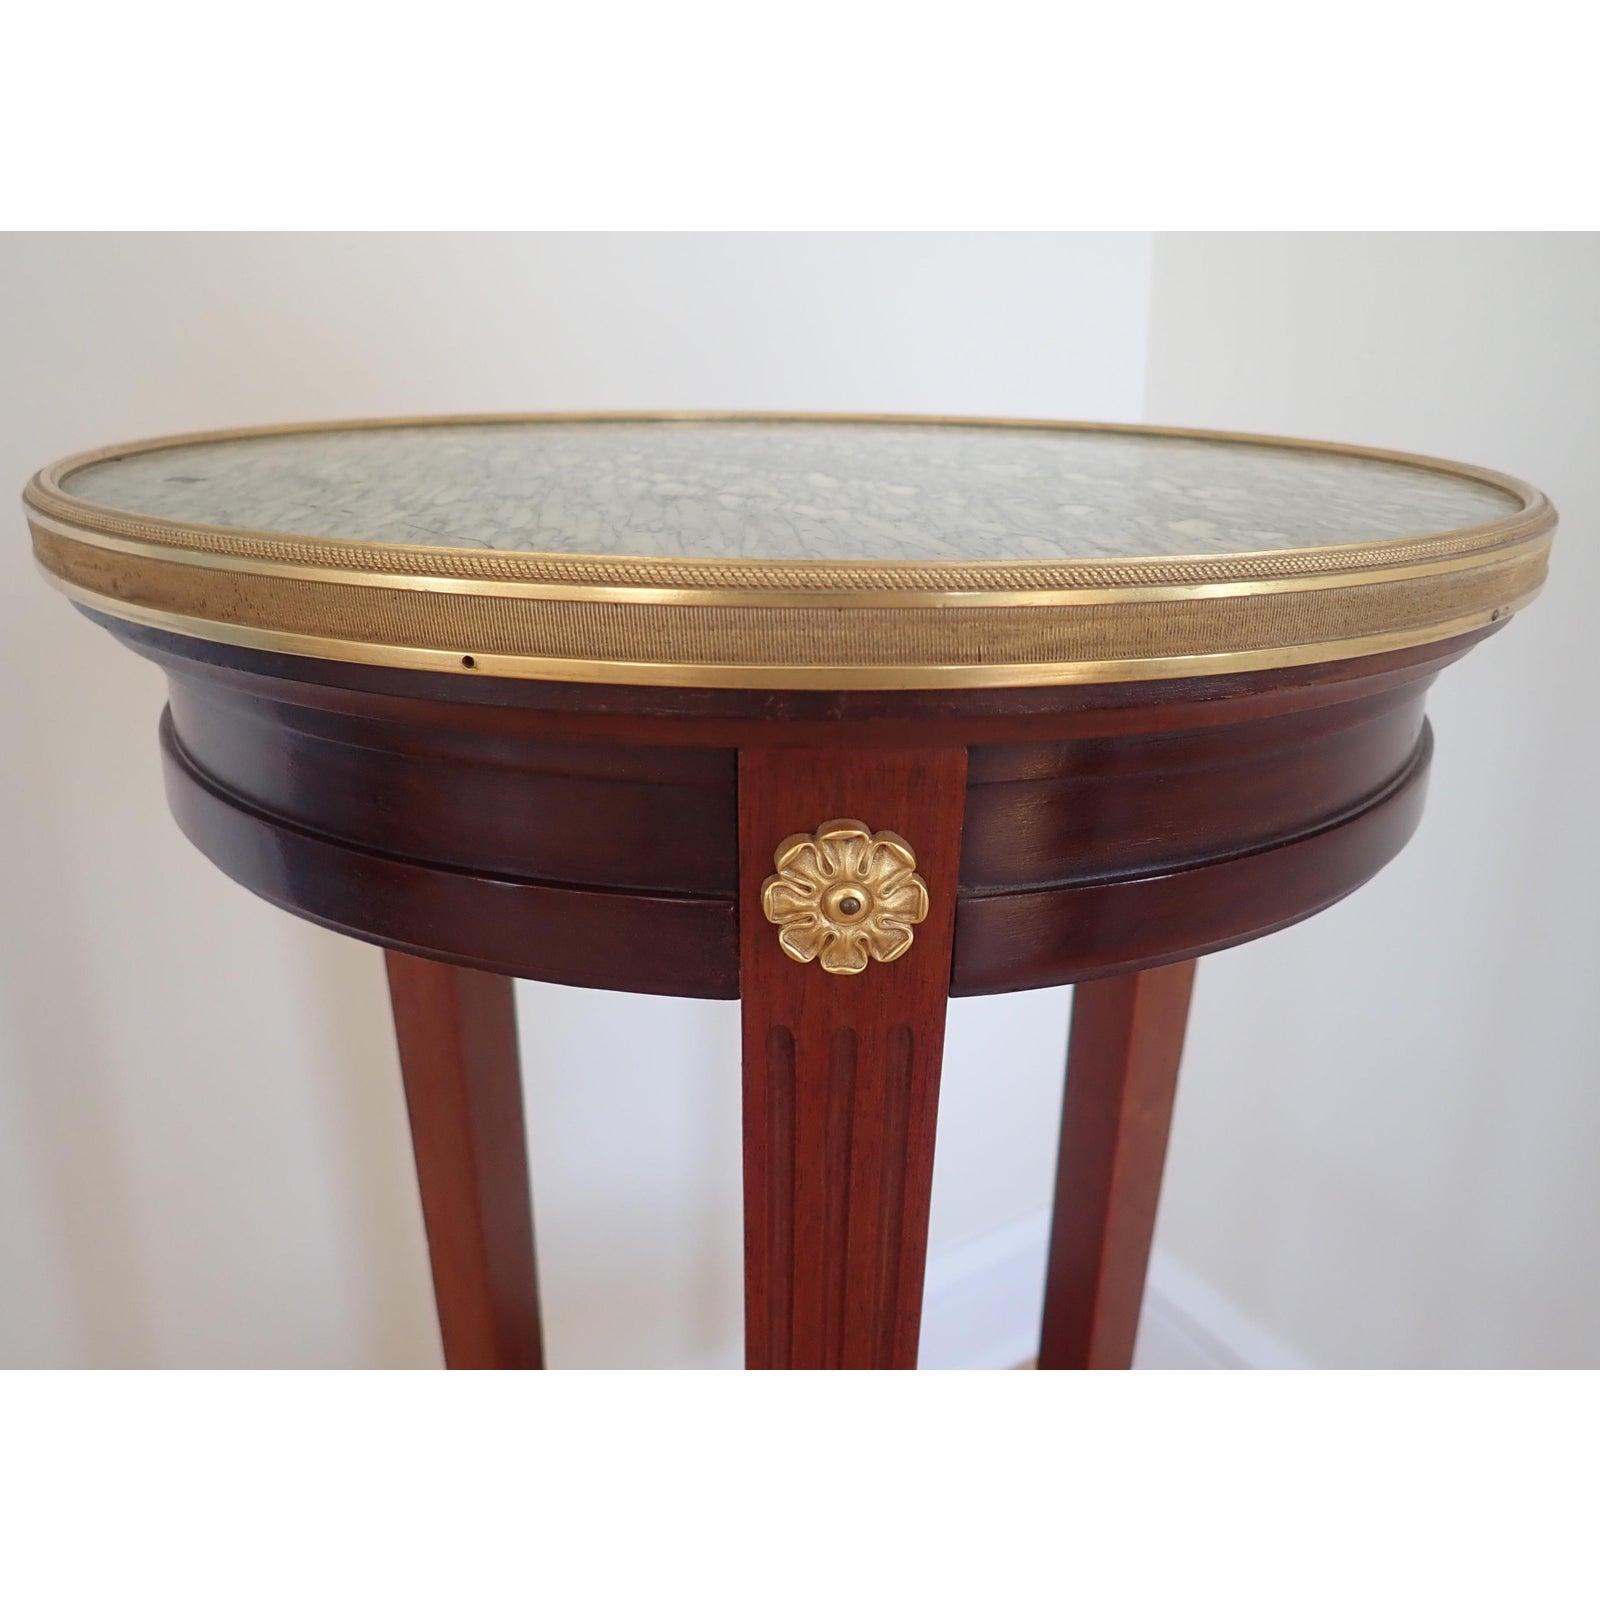 Gilt Mahogany Marble Top Green and White Pedestal